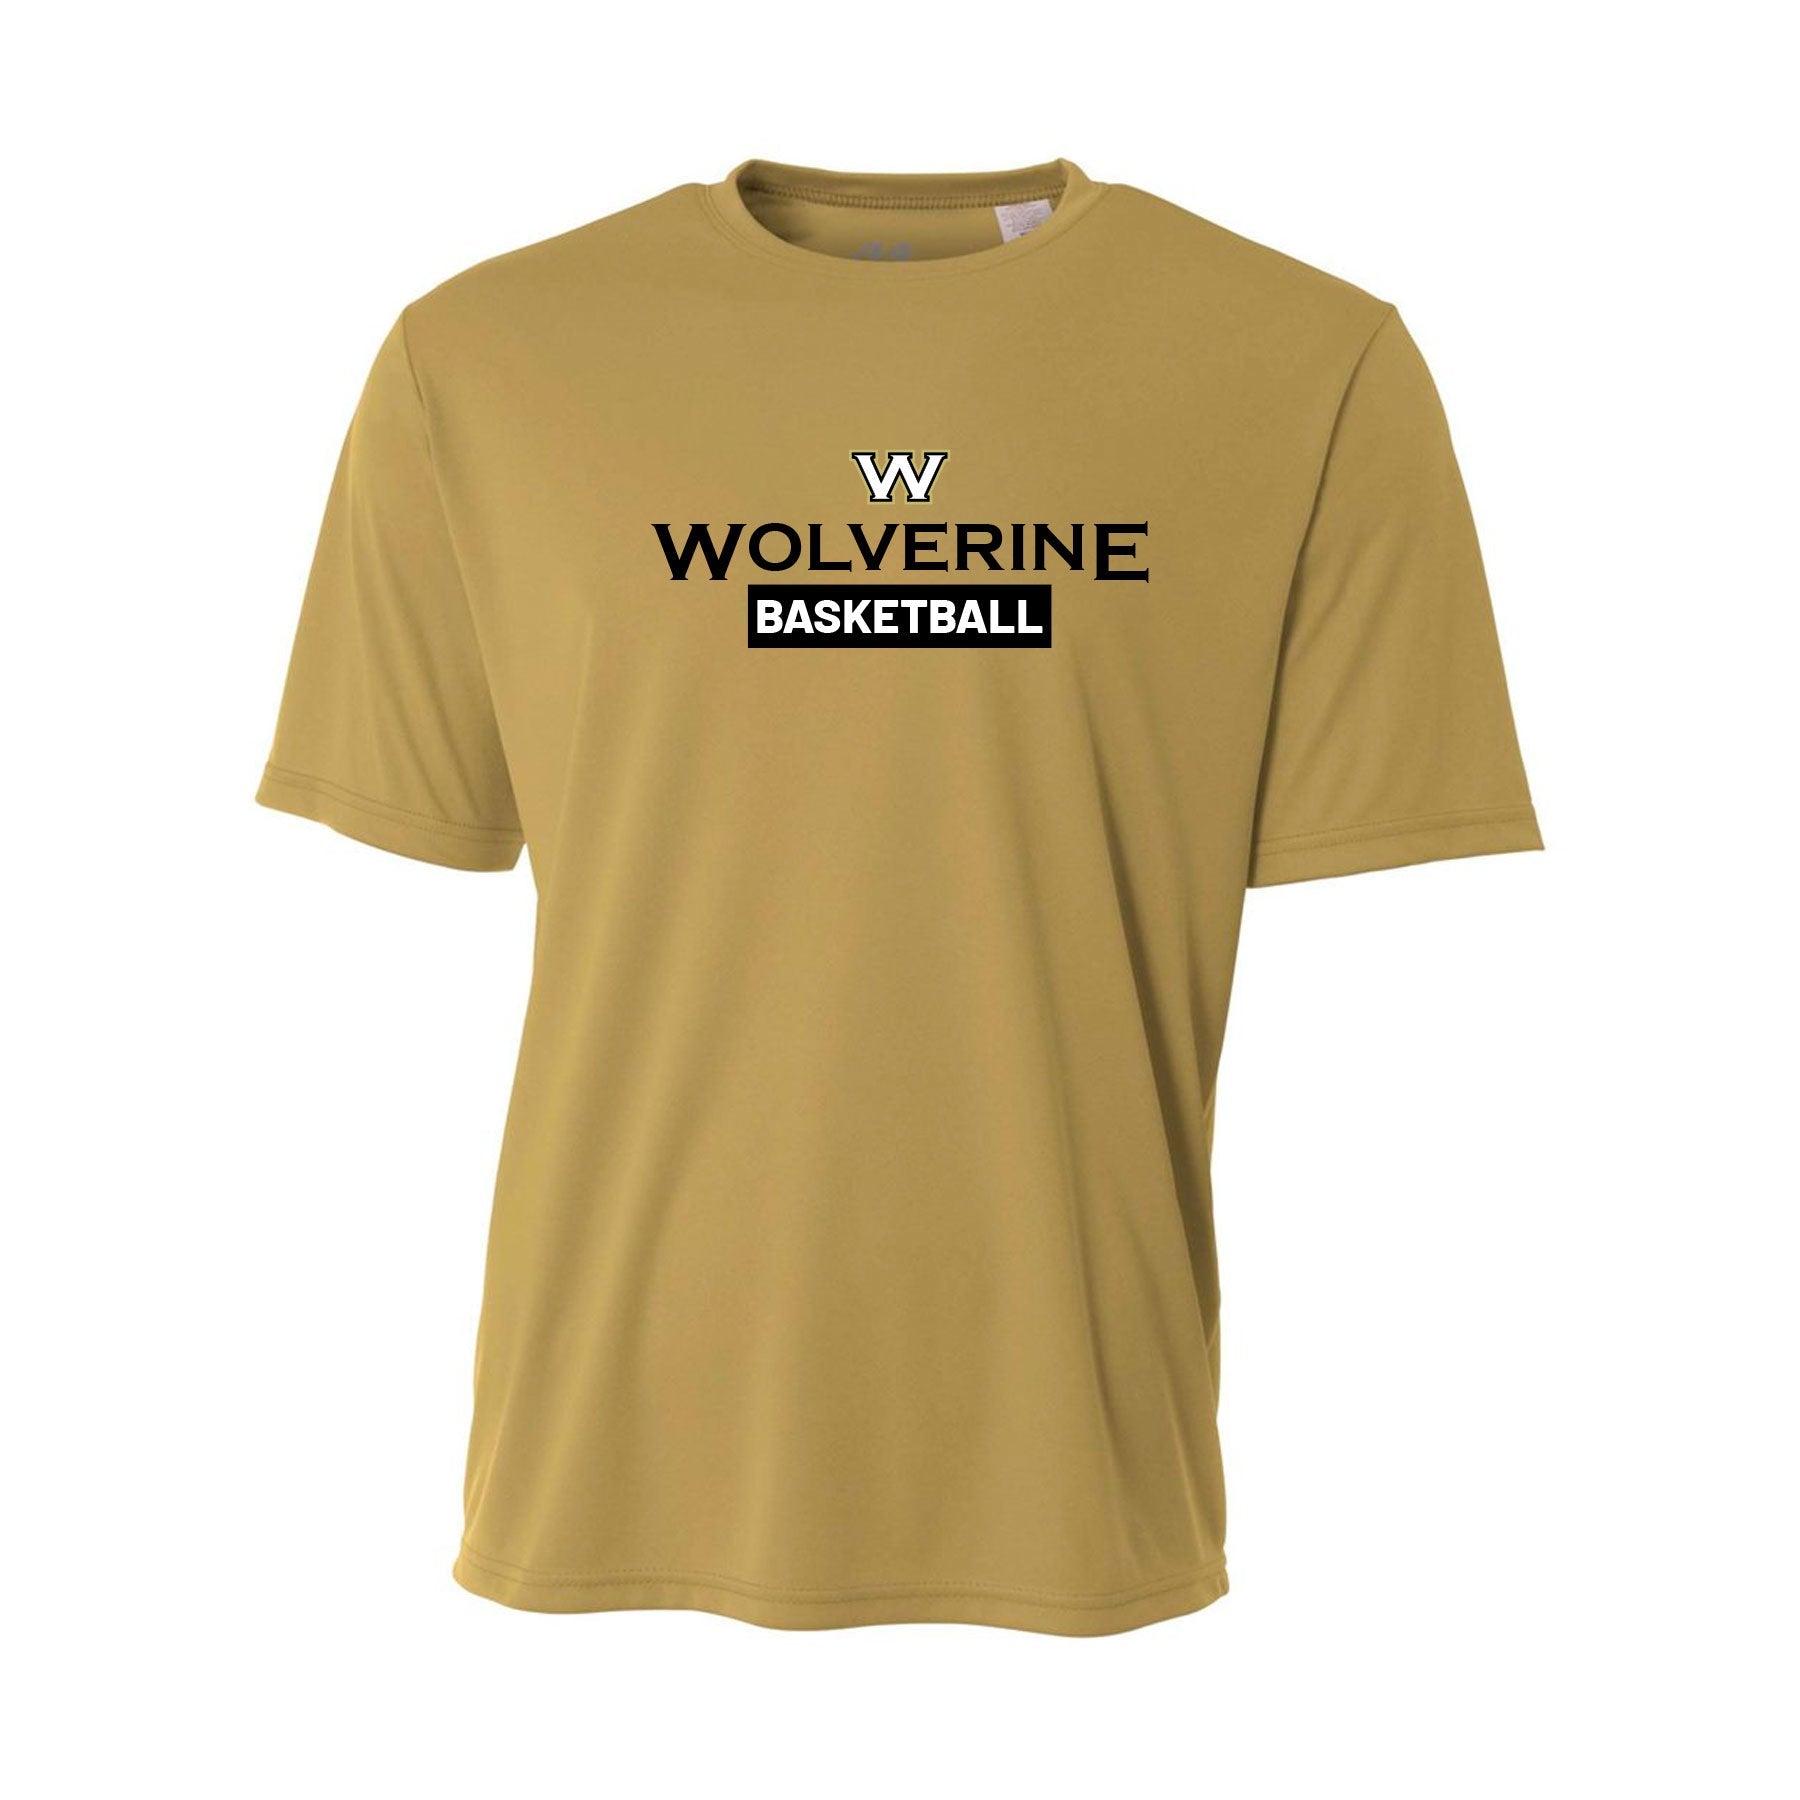 Wolverine Basketball Classic Youth Performance Tee